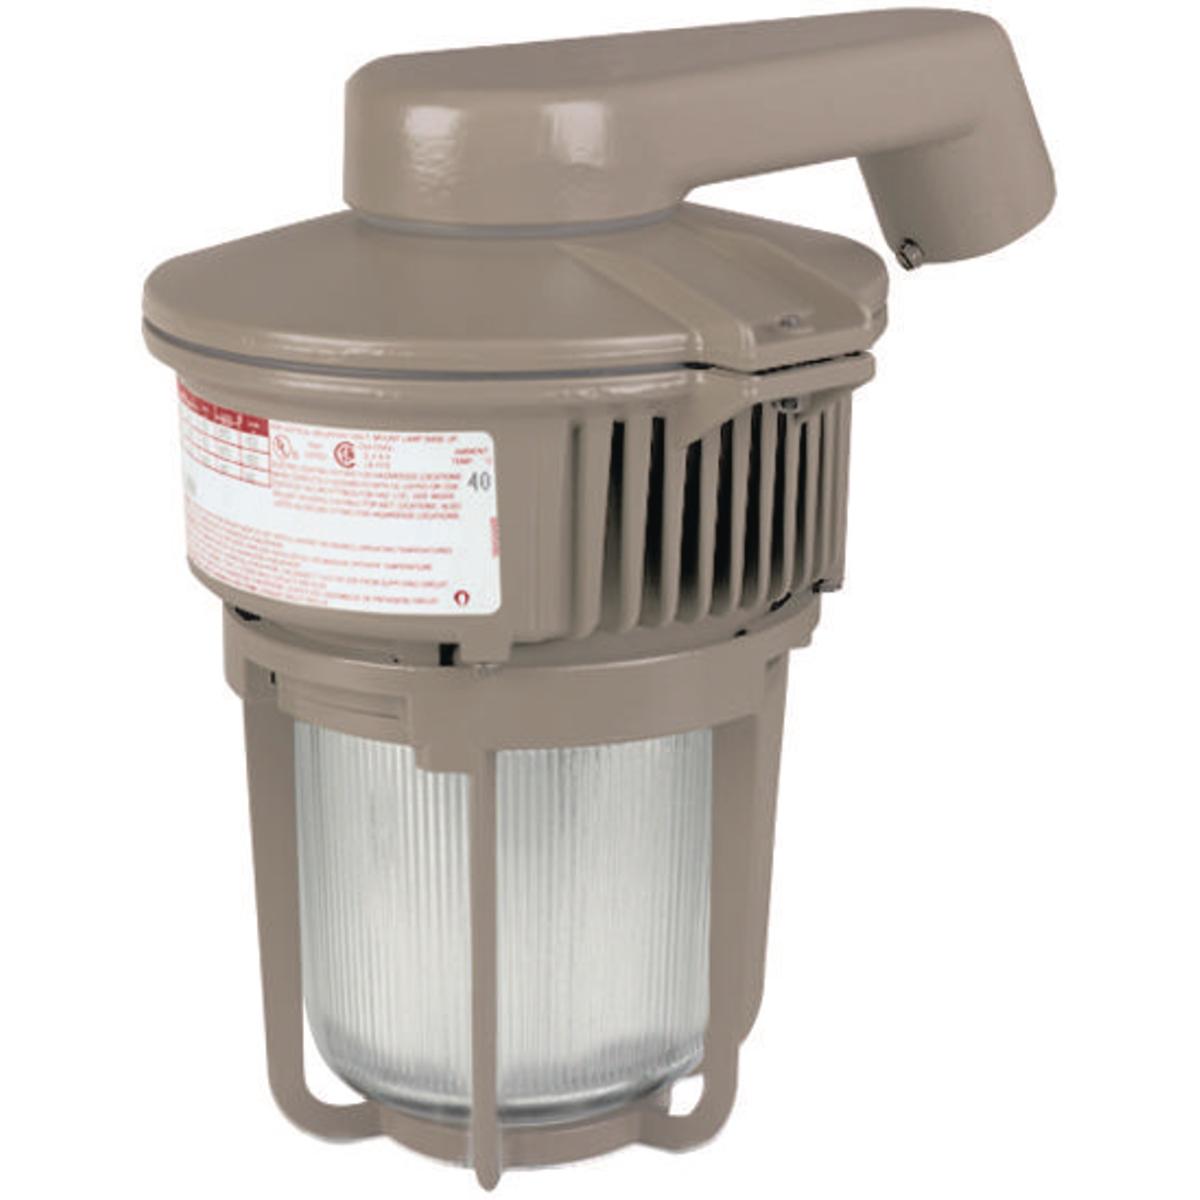 Hubbell MBL501-GD5 50W HPS Fluorescent 120V 1-1/2" " Stanchion Mount  ; Ballast tank and splice box – corrosion resistant copper-free aluminum alloy ; Baked powder epoxy/polyester finish, electrostatically applied for complete, uniform corrosion protection ; All external ha